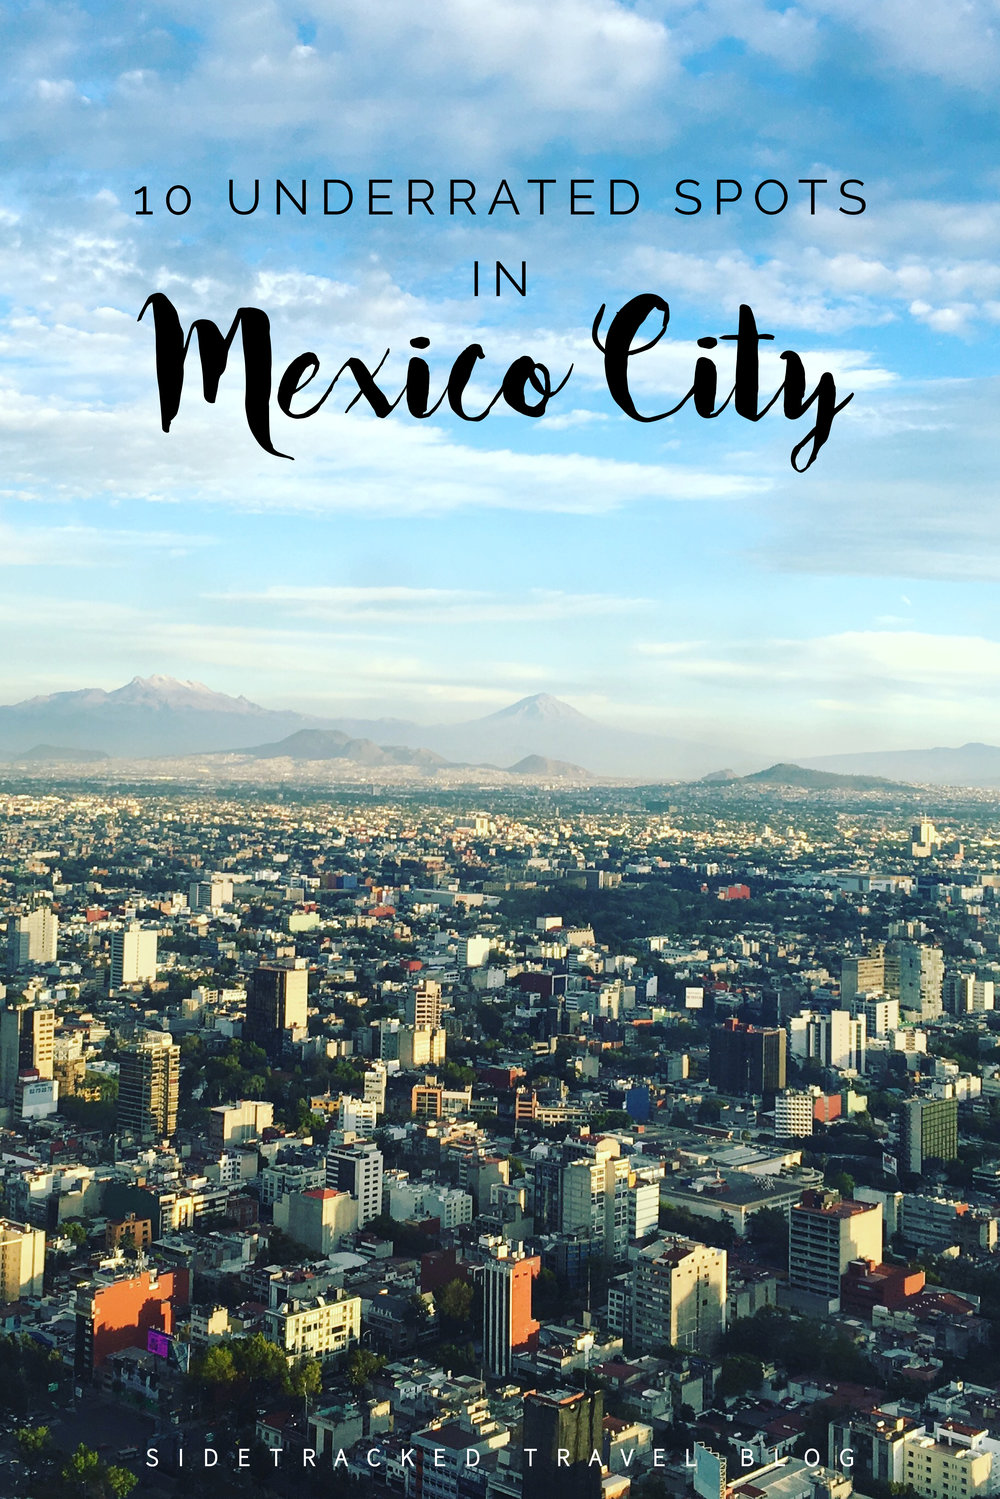  If you're in the midst of planning out your trip to Mexico City and feeling a bit overwhelmed by the world's tenth largest city, I've put together this list of 10 underrated spots well worth visiting. 